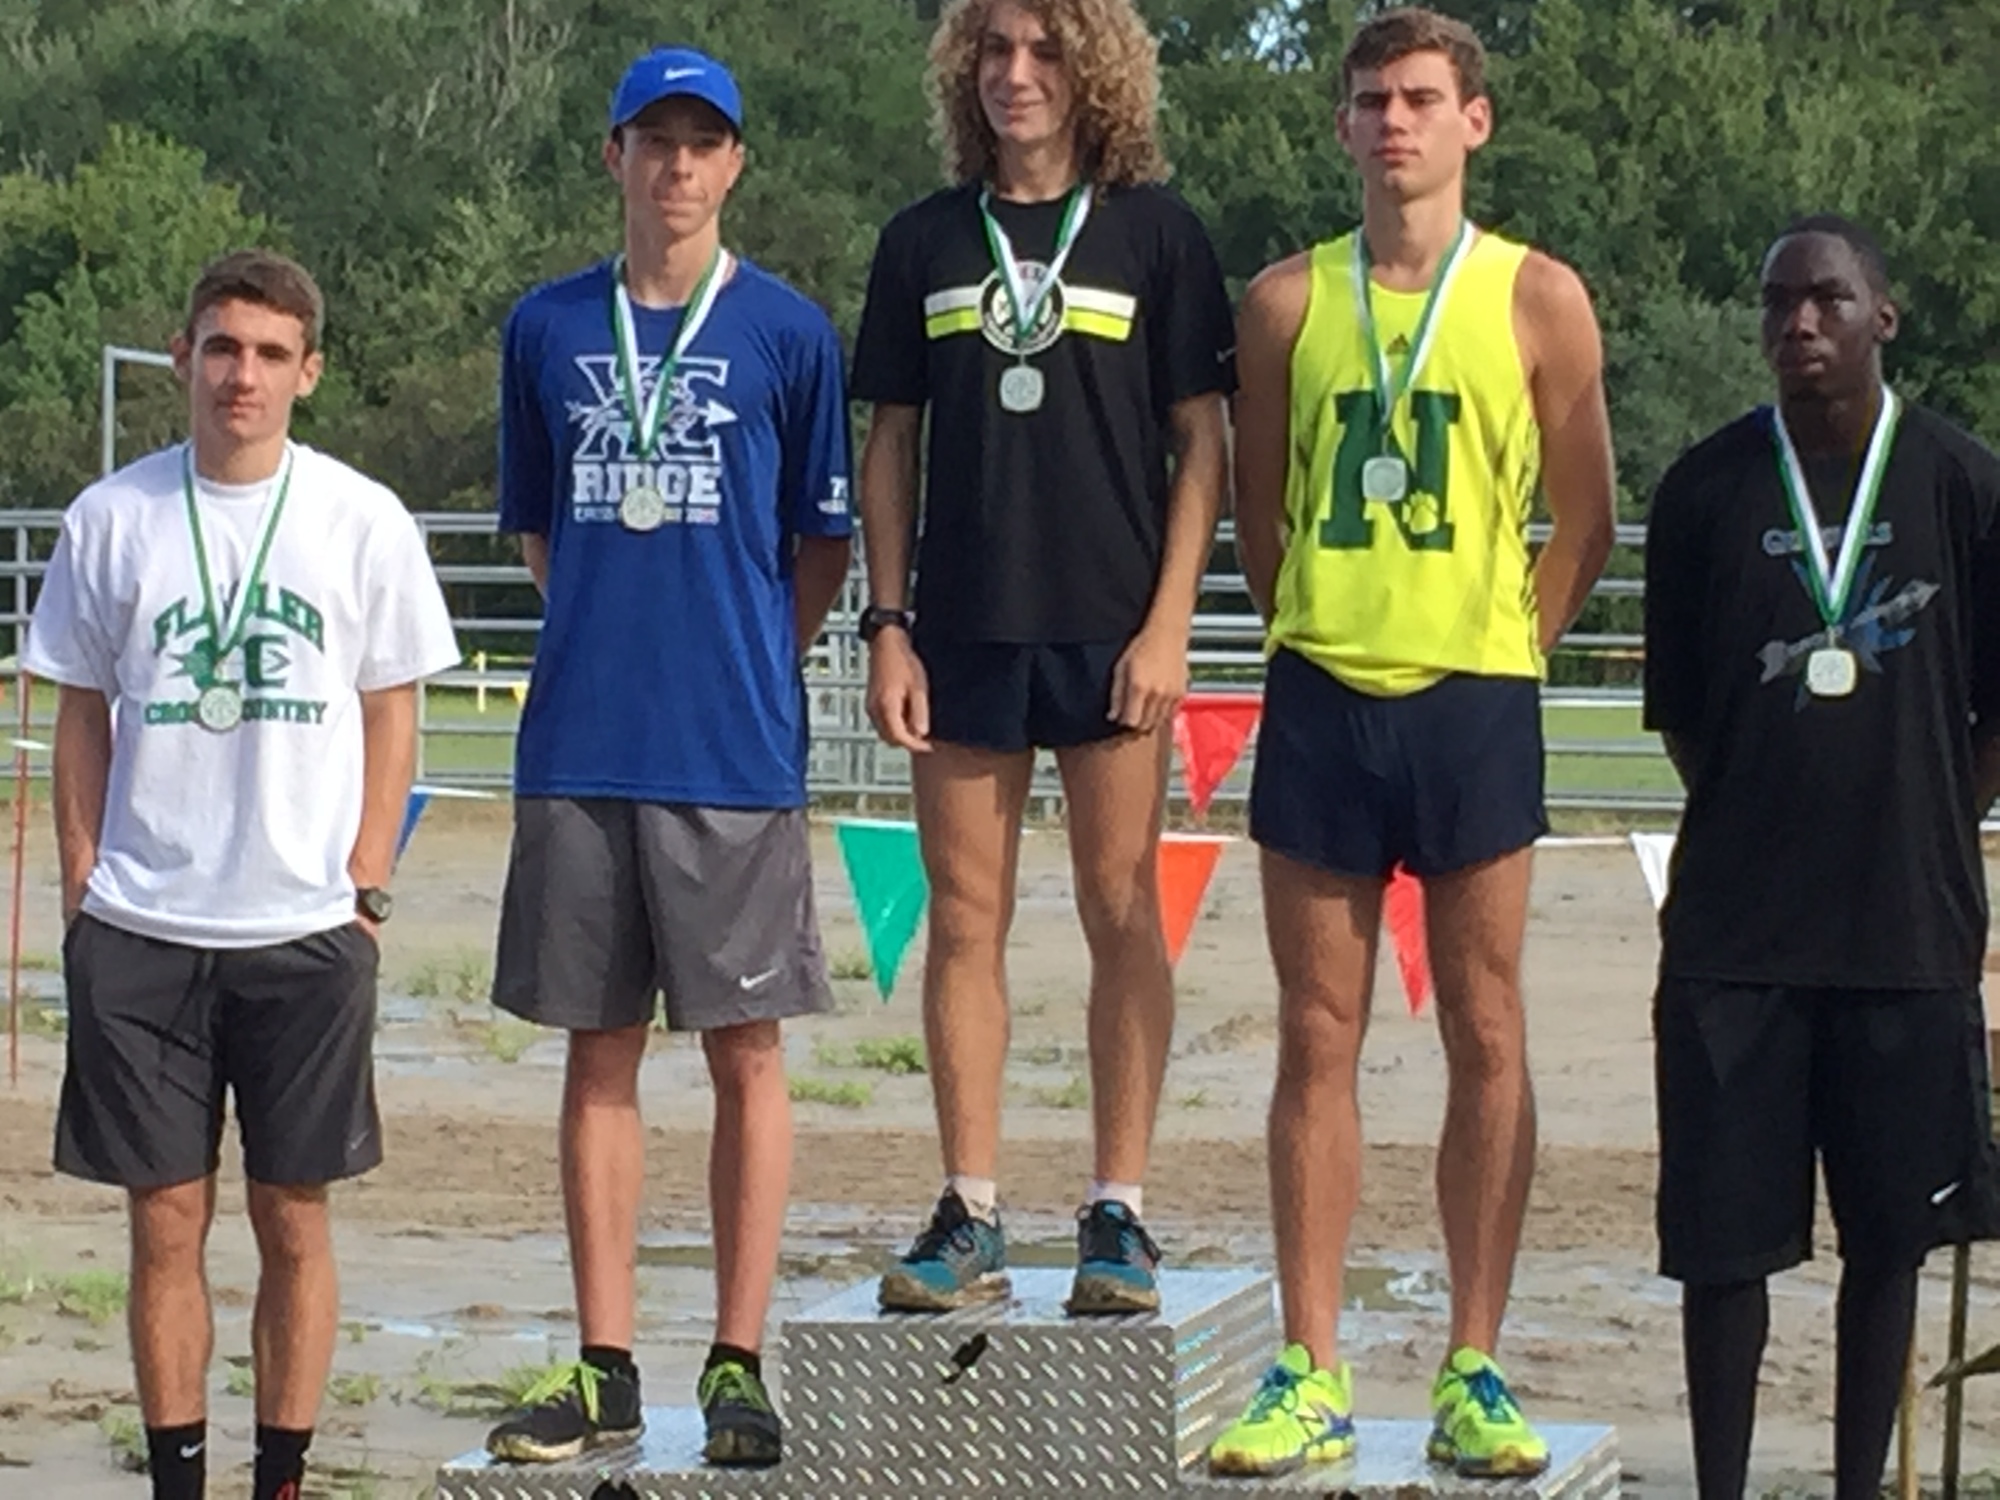 Justin Pacifico, on the left, won fourth place for the FPC Bulldogs. Courtesy photo